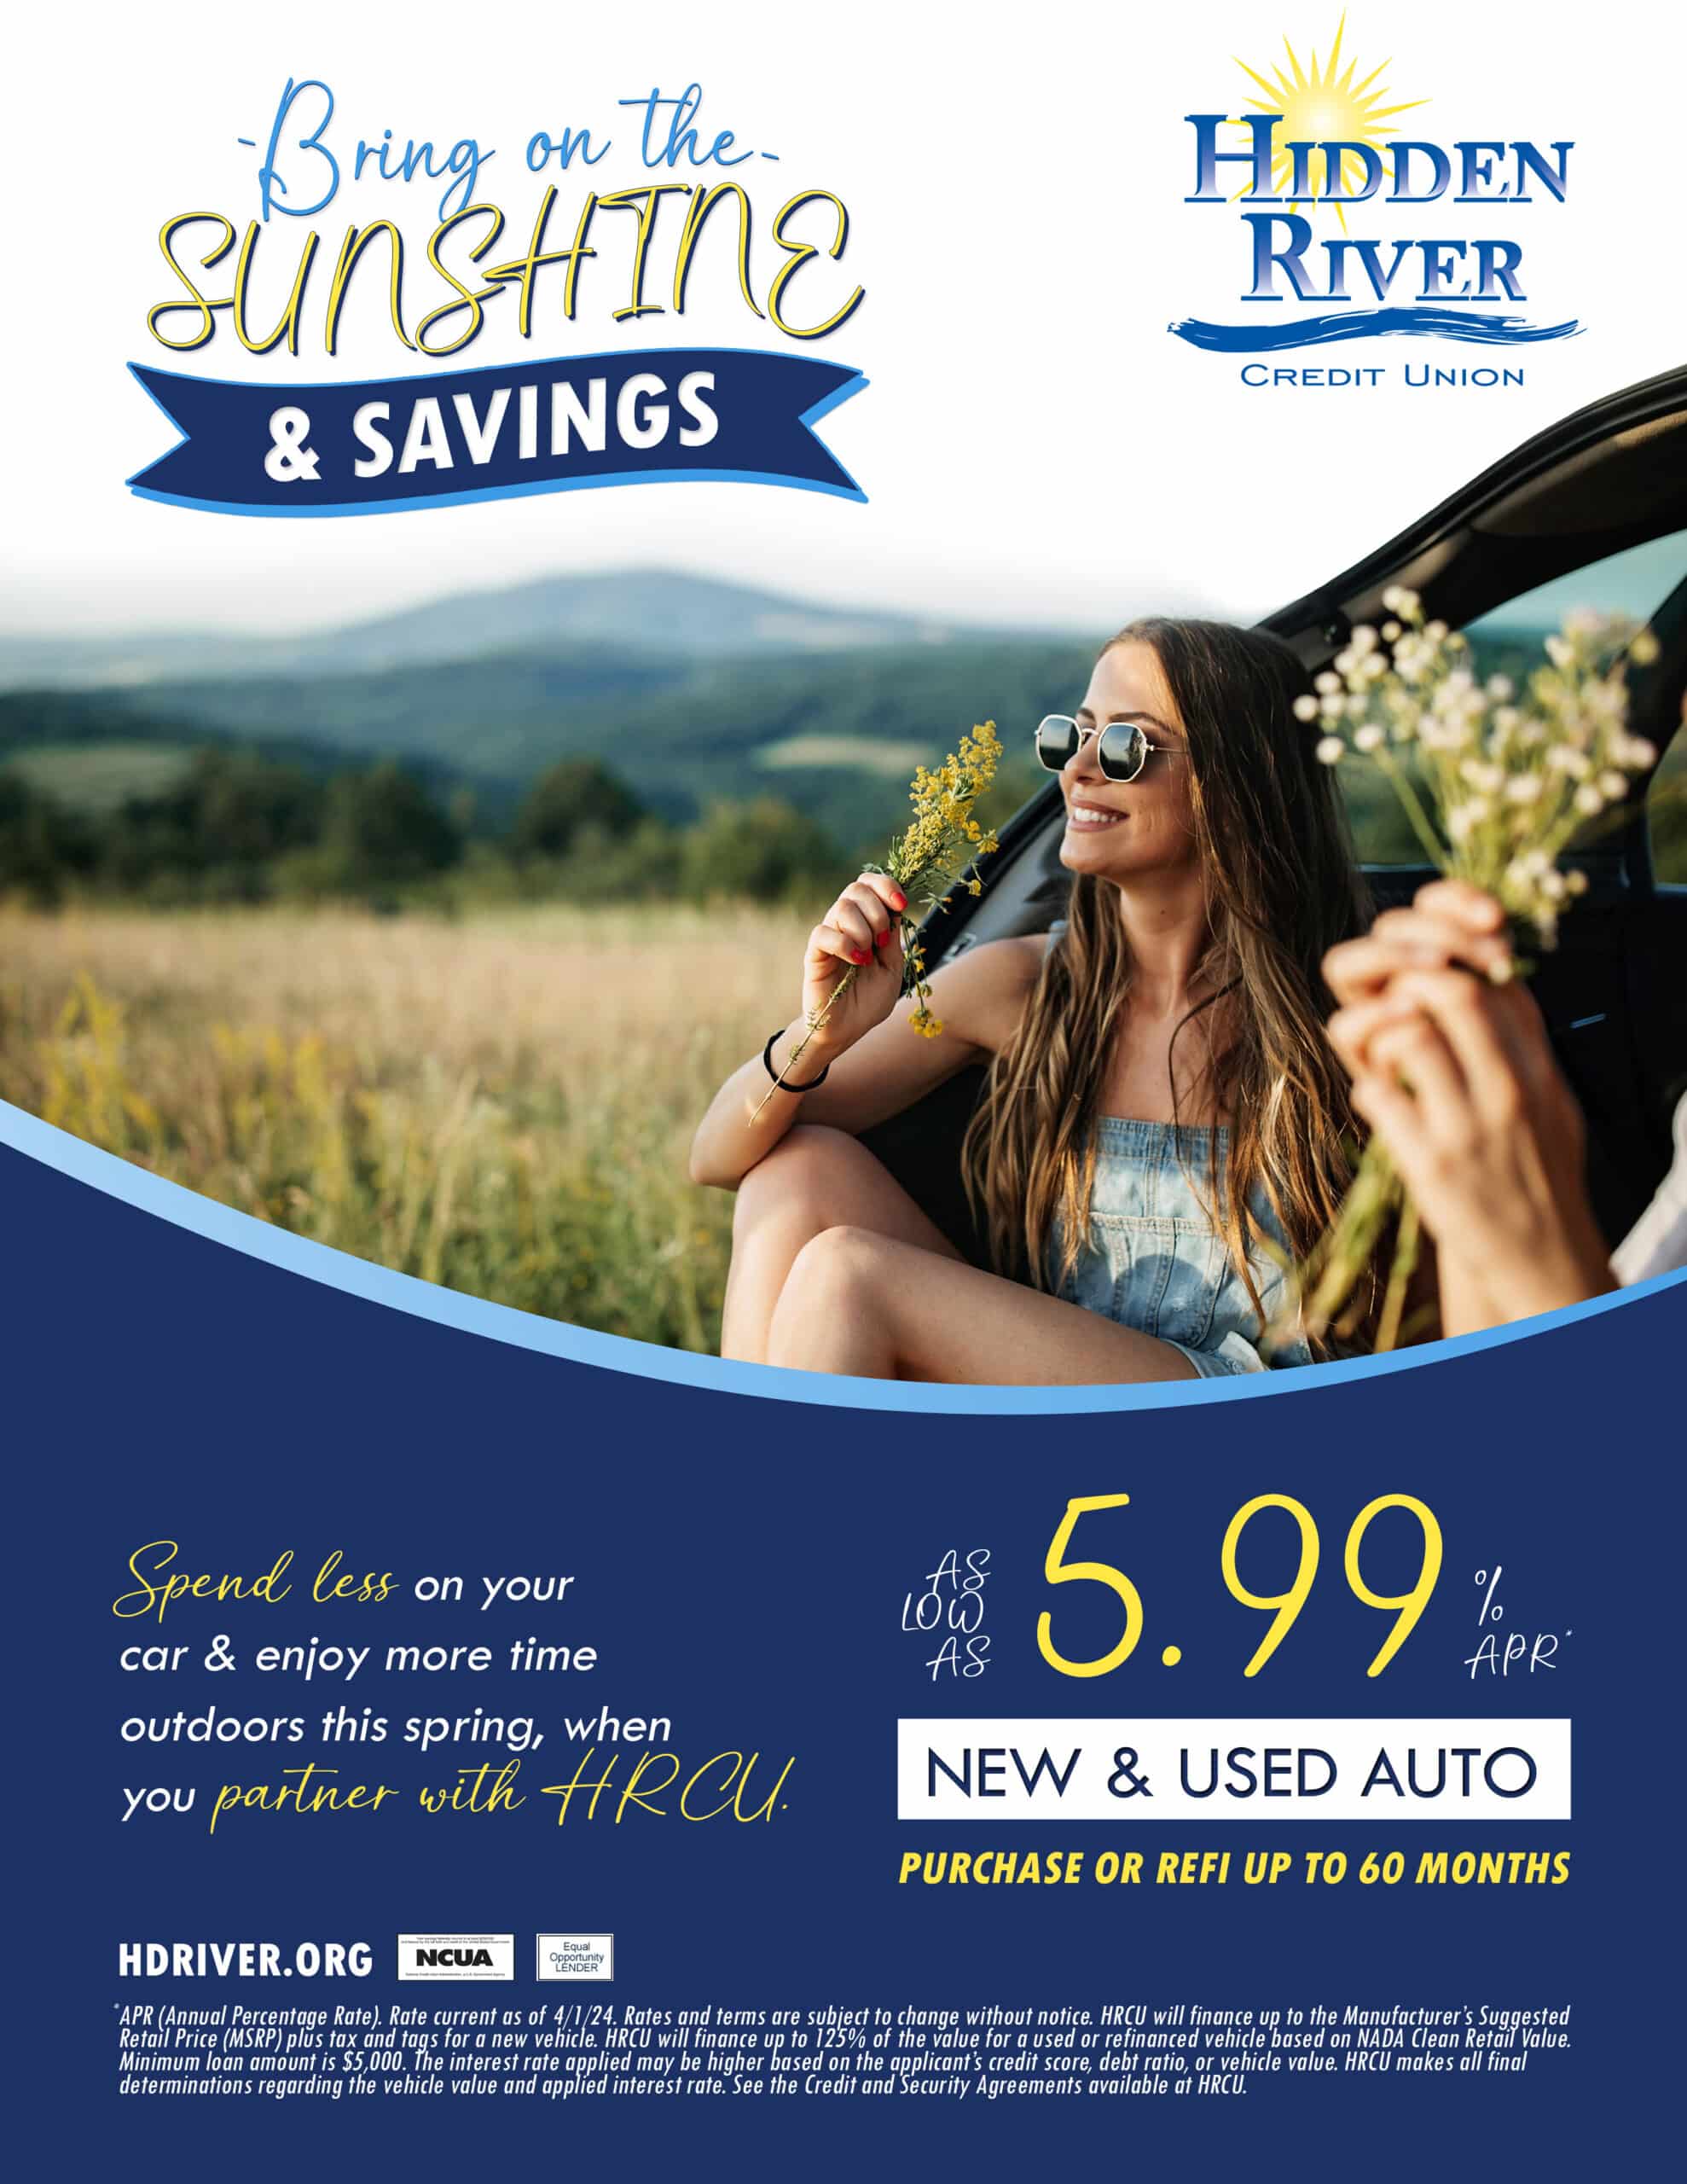 Bring on the Sunshine & Savings auto loan promo flyer. Girl with sunglasses on holding wildflowers sitting in back of car near field. New and used auto loans as low as 5.99% APR. Purchase or refinance up to 60 months.